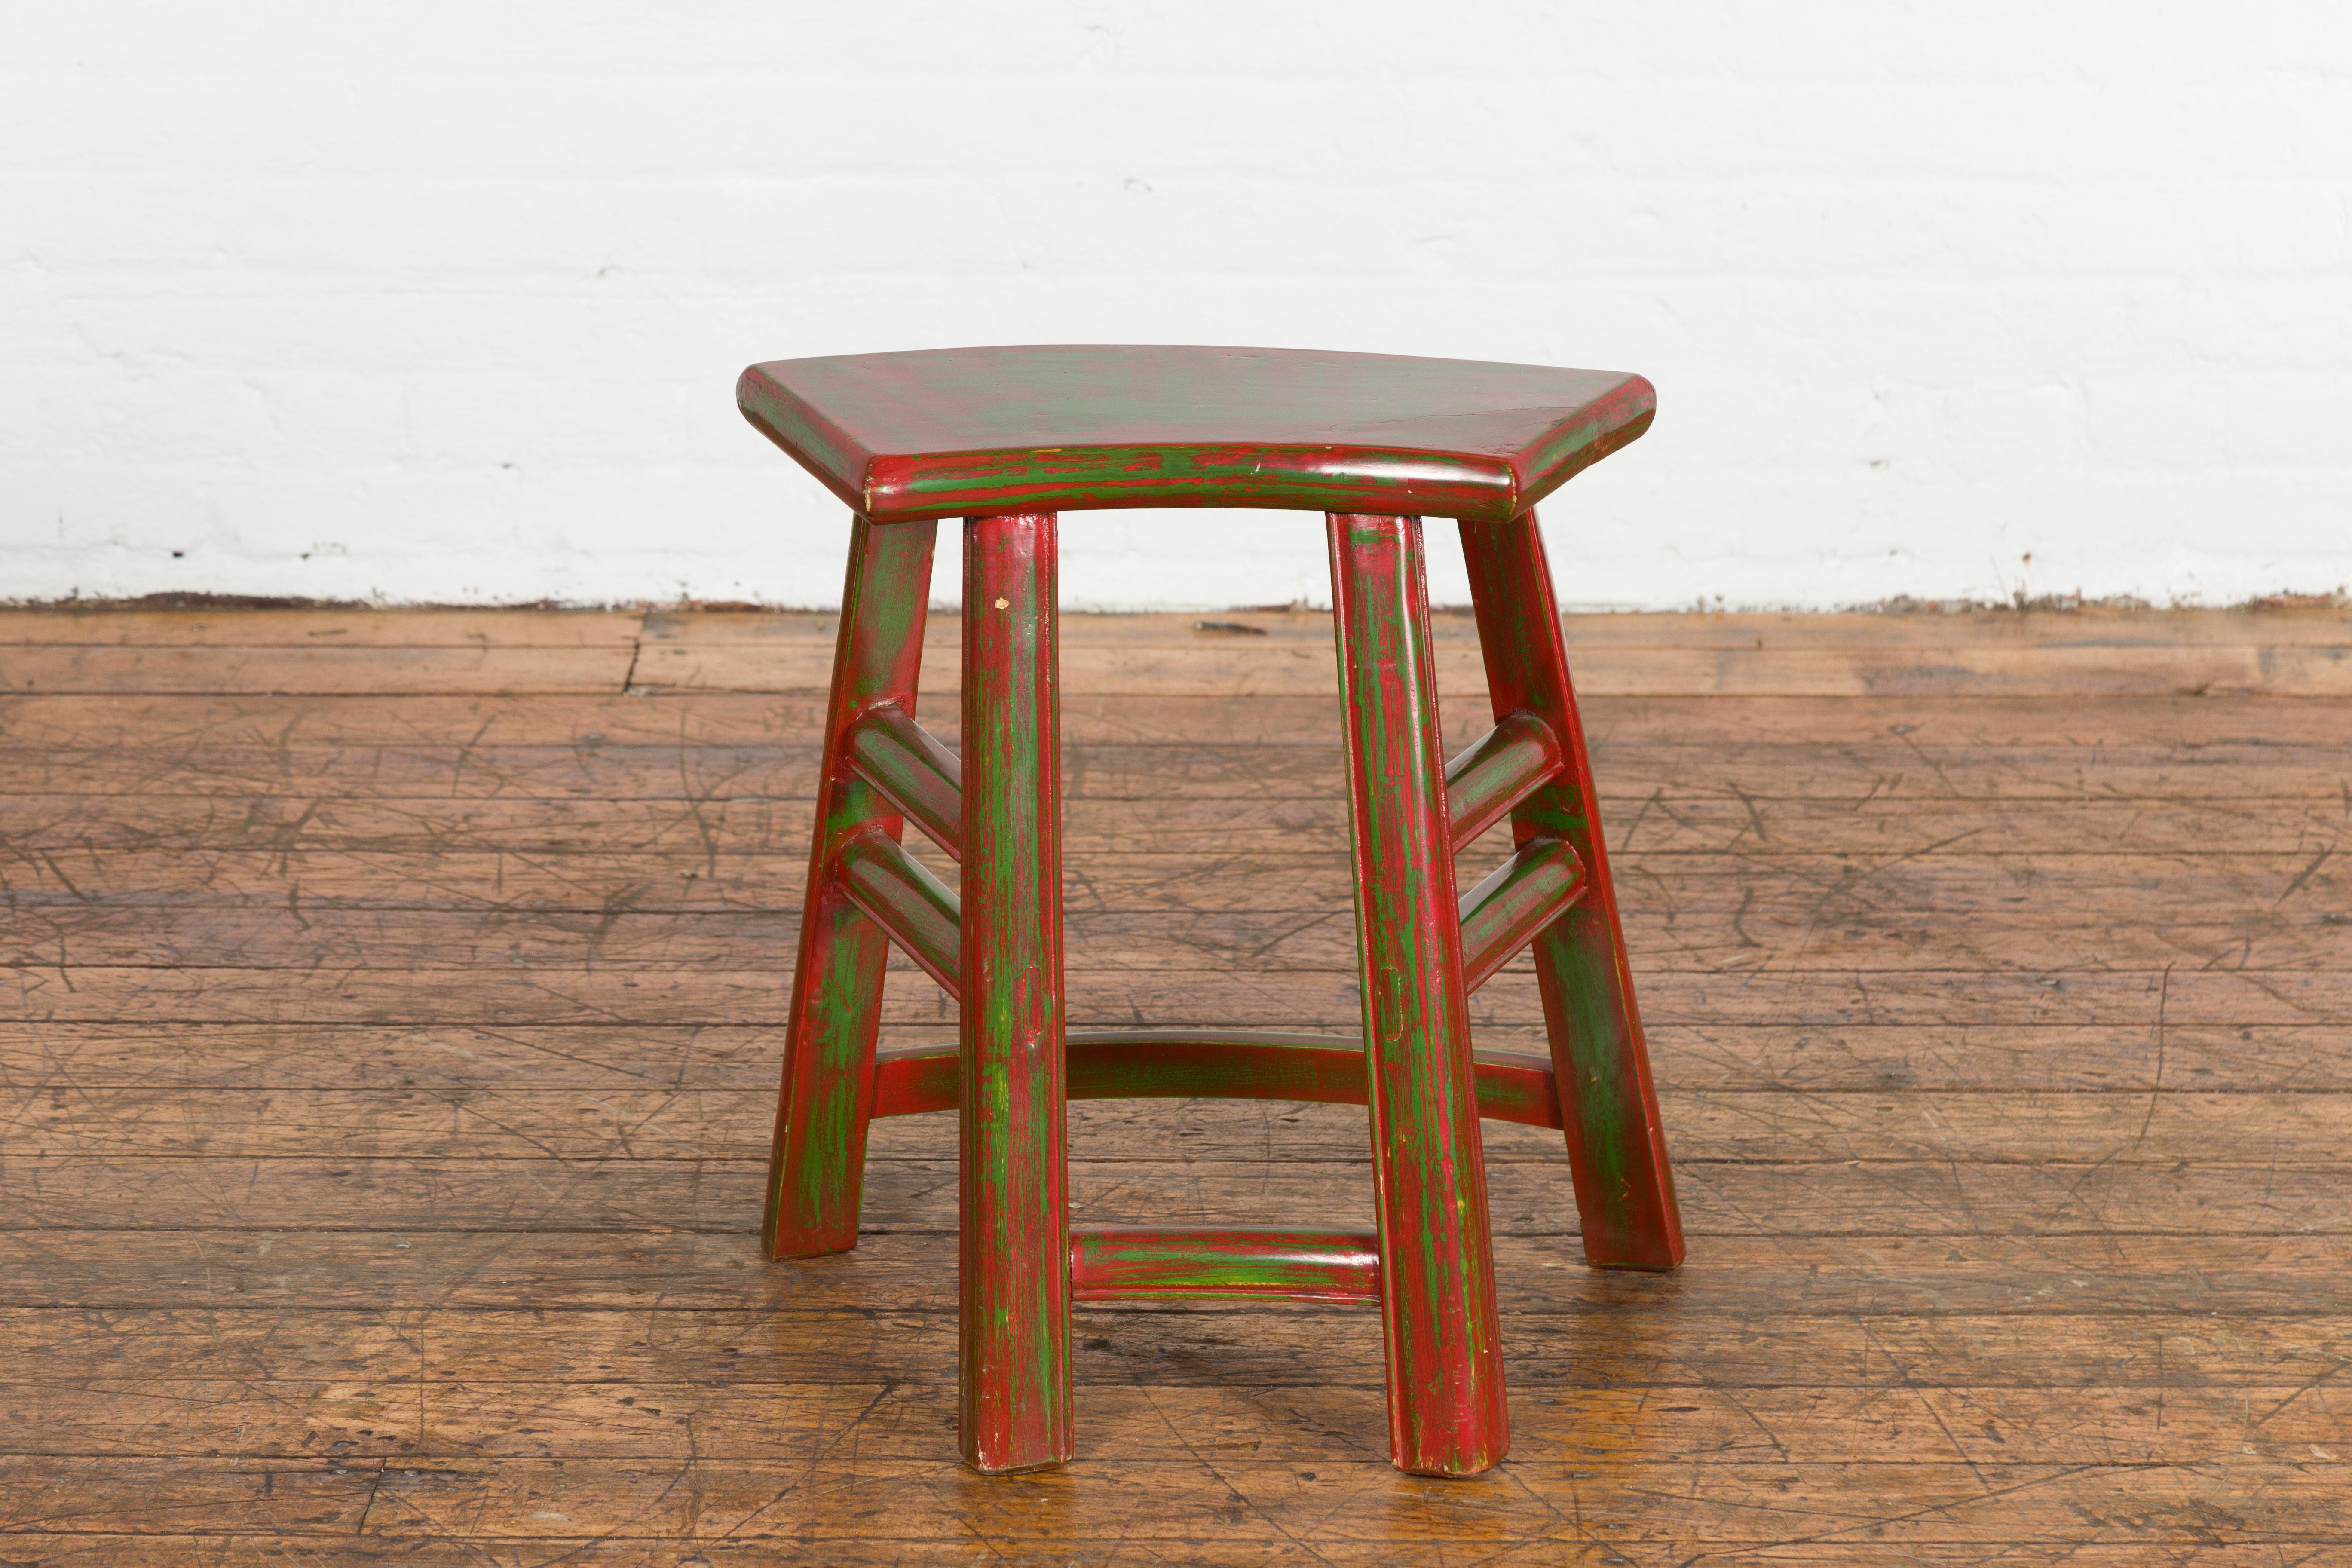 A Japanese late Meiji period red lacquered stool from the early 20th century, with hand painted green accents, semi circular top, four splaying legs and side stretchers. Created in Japan during the late Meiji period in the early years of the 20th